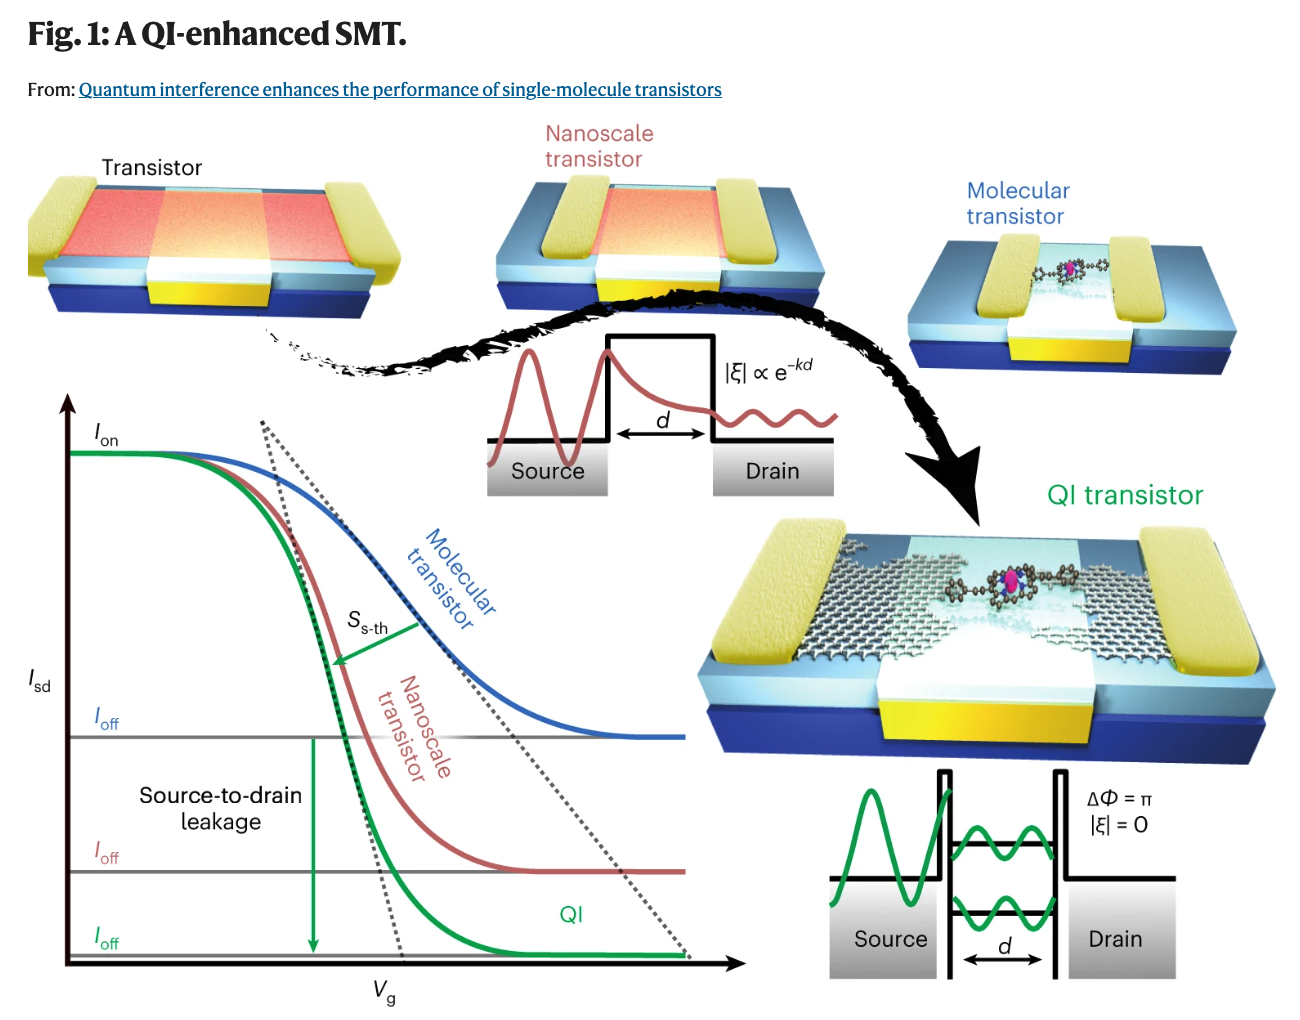 Fig. 1: A QI-enhanced SMT From: Quantum interference enhances the performance of single-molecule transistors